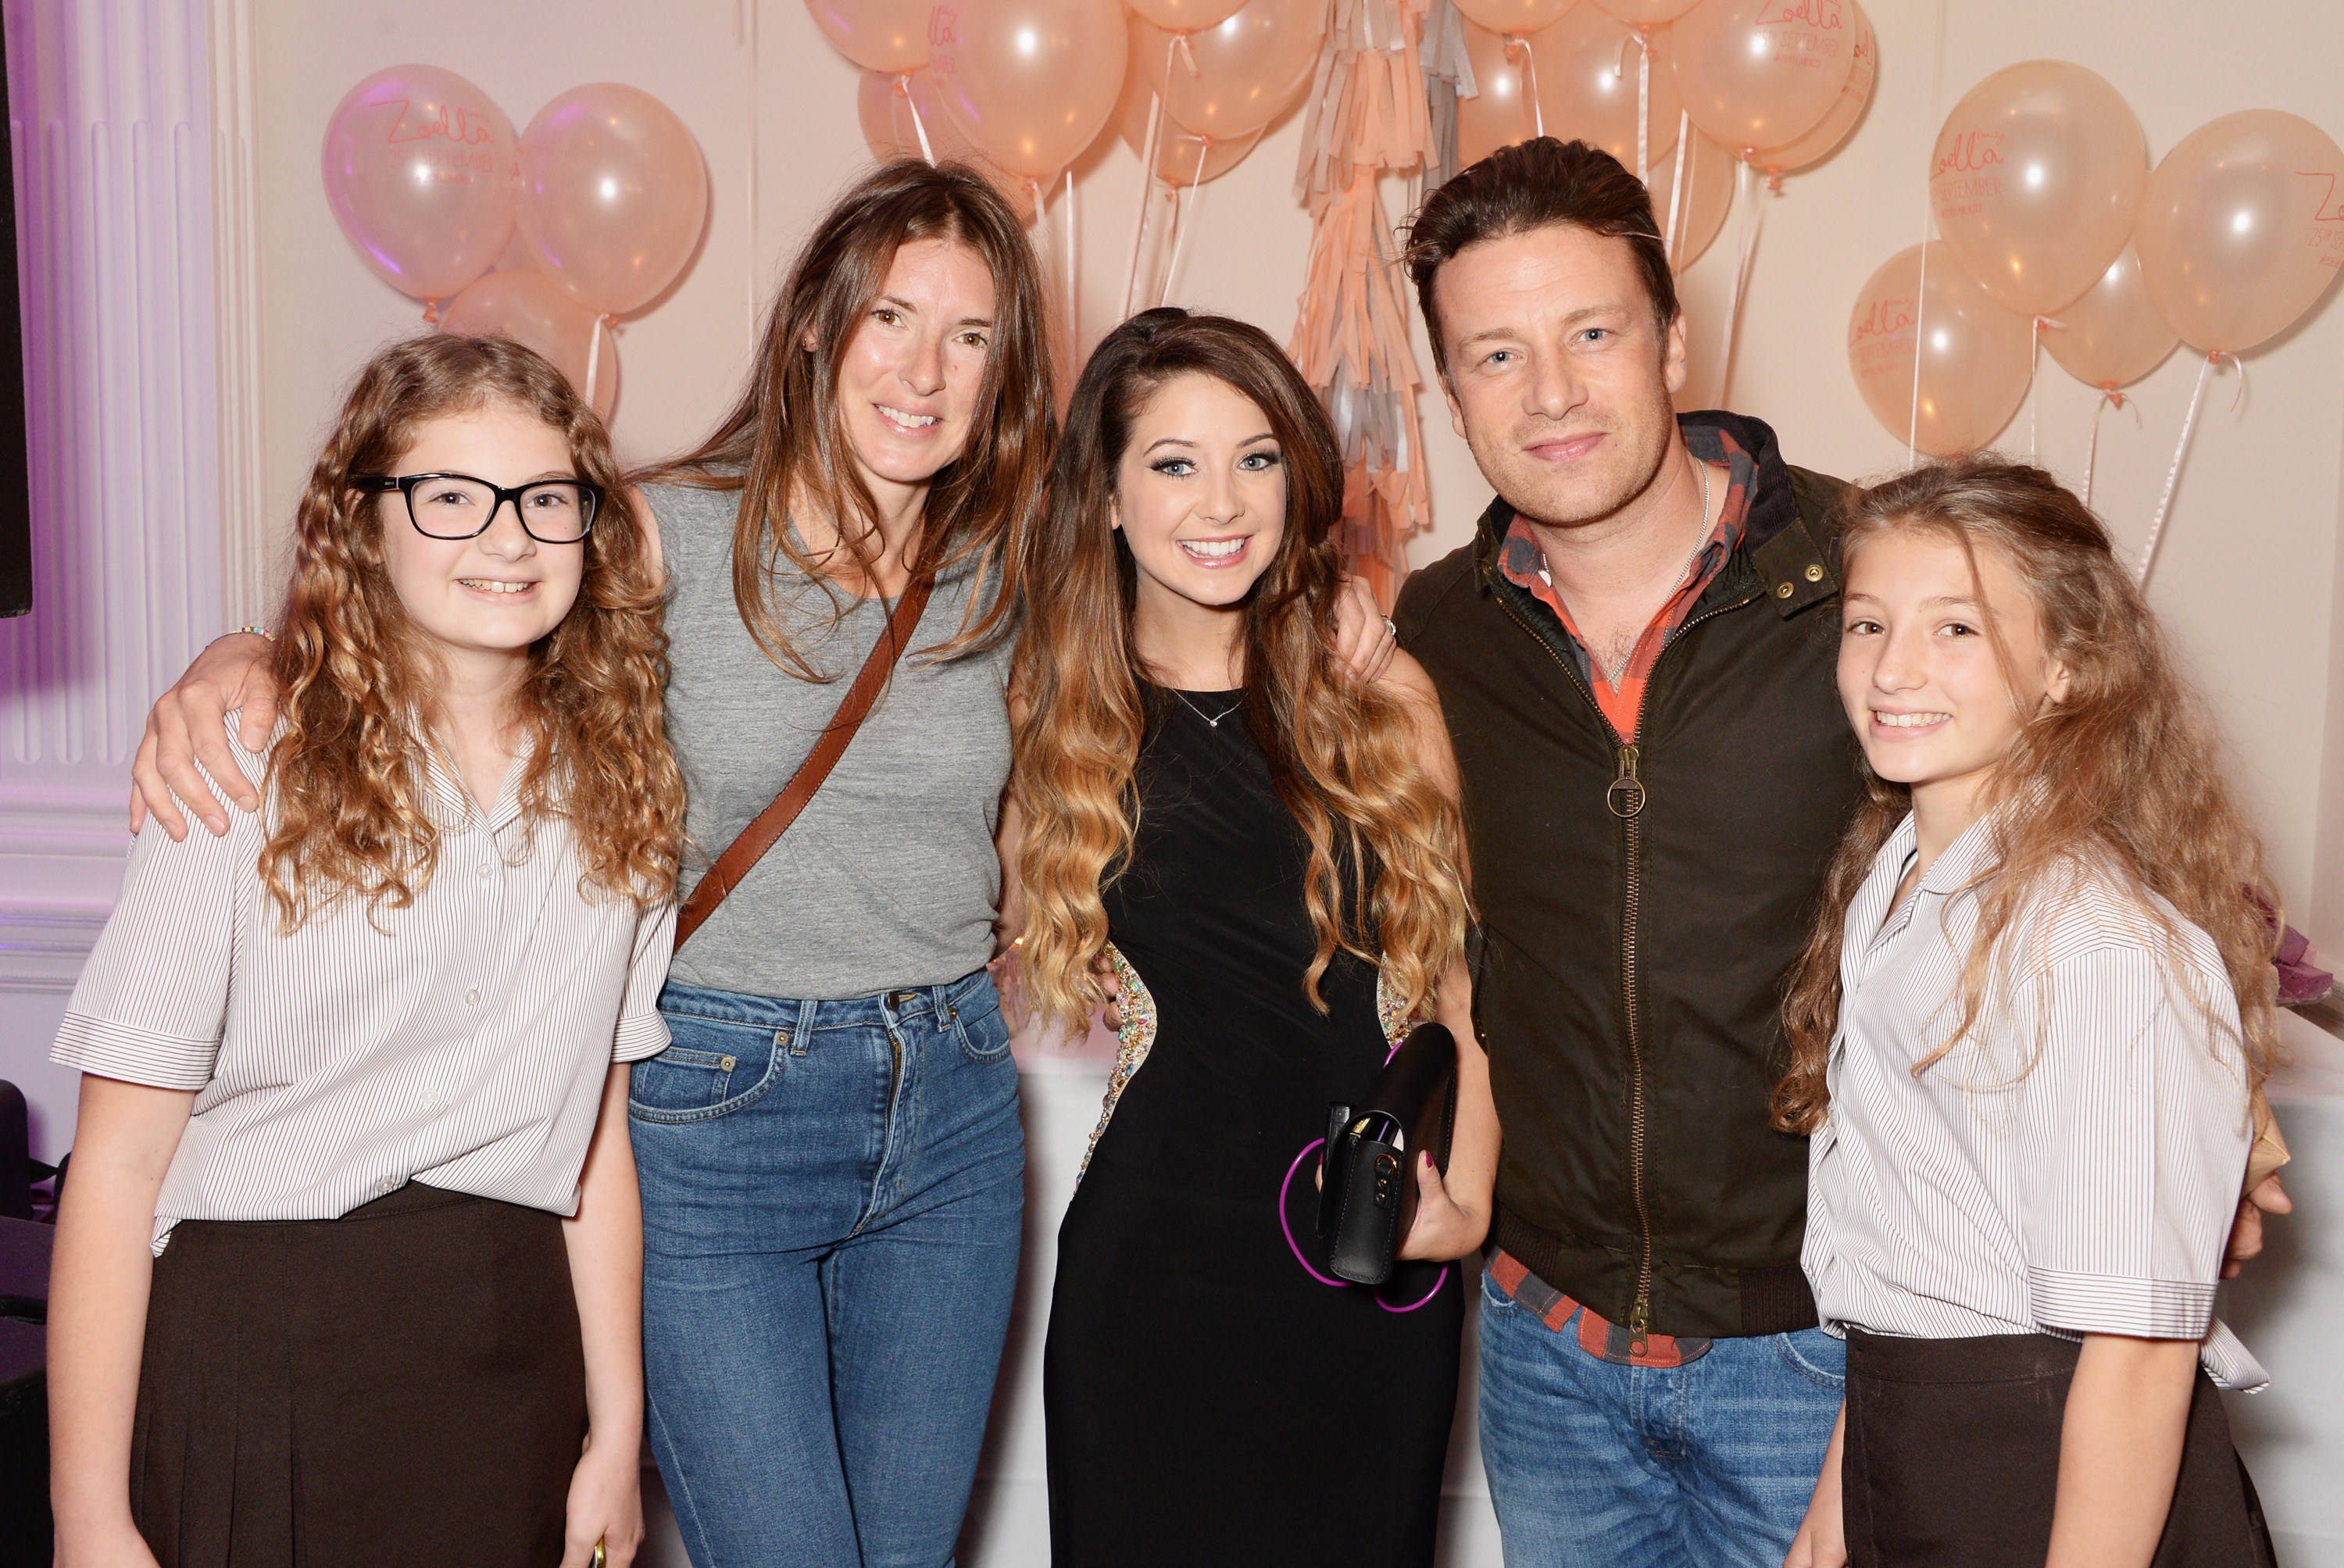 Poppy Oliver, Jools Oliver, Zoe Sugg, Jamie Oliver and Daisy Oliver attend YouTube phenomenon Zoe Sugg&#x27;s (Zoella) launch of her debut beauty collection